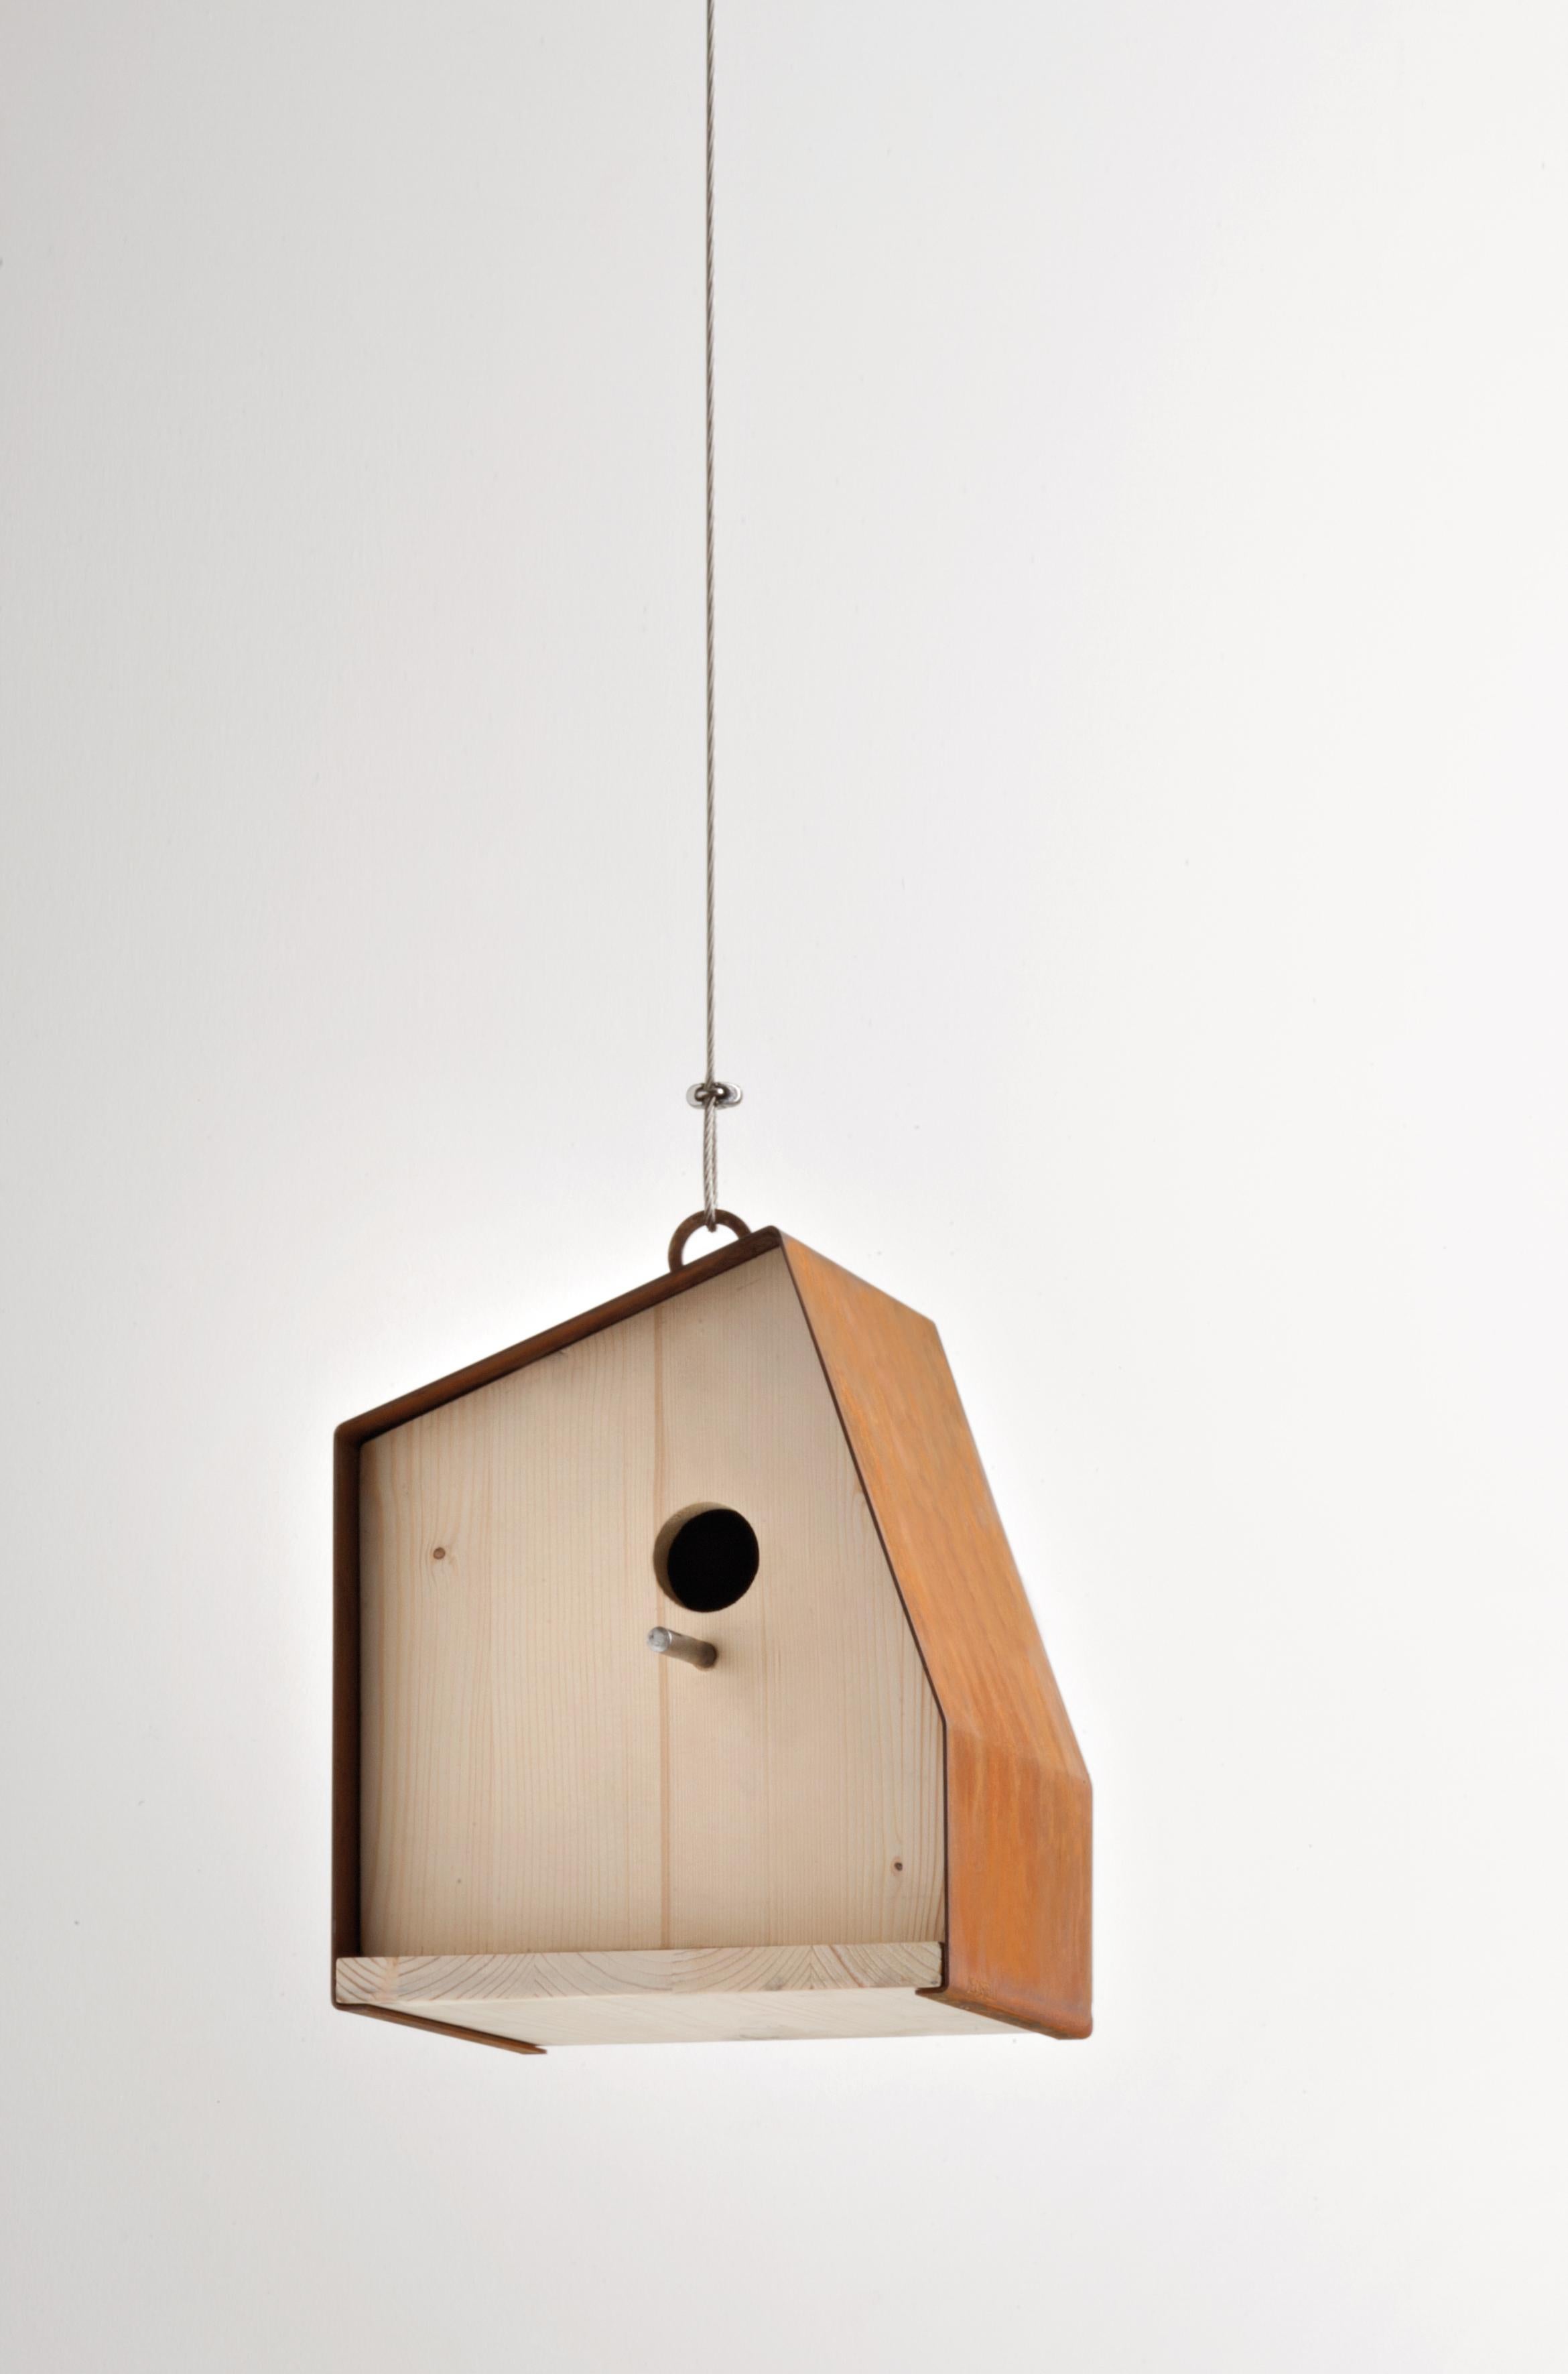 Our care for the environment around us can also be seen in the attention paid to our small friends in the animal kingdom. A small birdhouse can set the stage, with a structure that’s both soaring and solid, nest and refuge - a secret port to hang